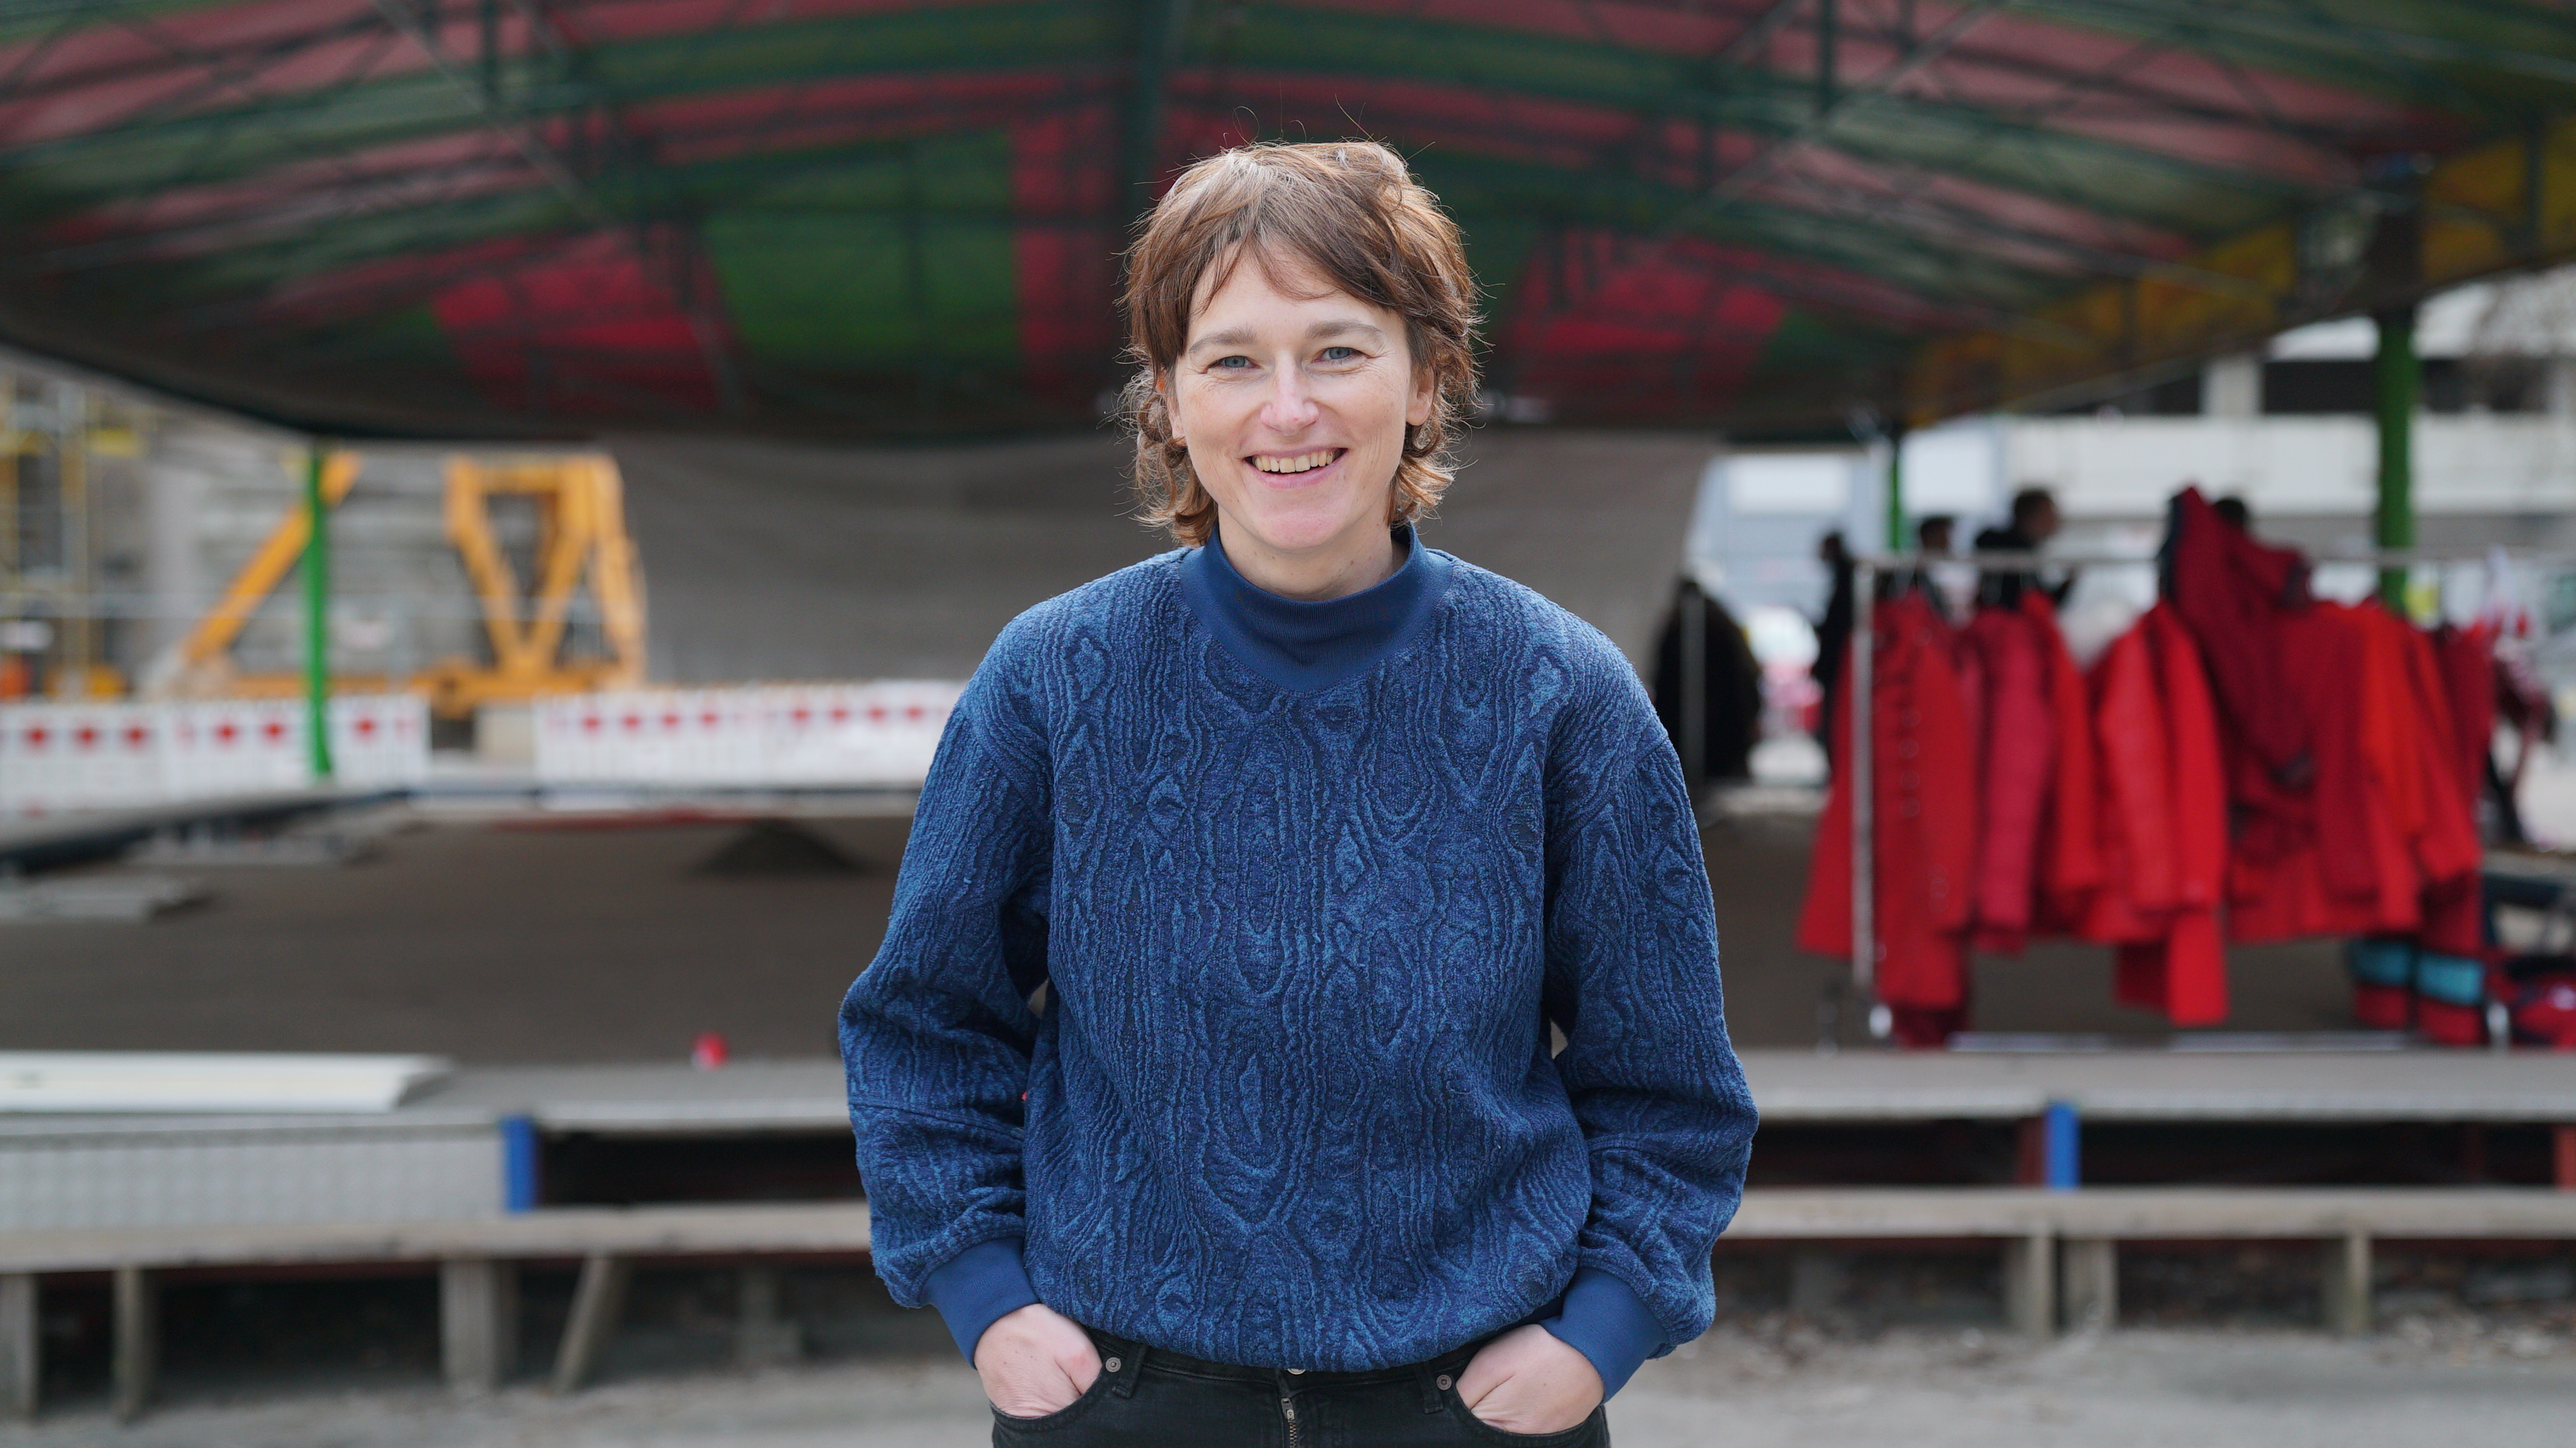 Melanie Hinz has about shoulder-length brown hair and bangs and stands in front of an empty stage in a blue knitted sweater. She has her hands casually in her pockets and smiles broadly at the camera.